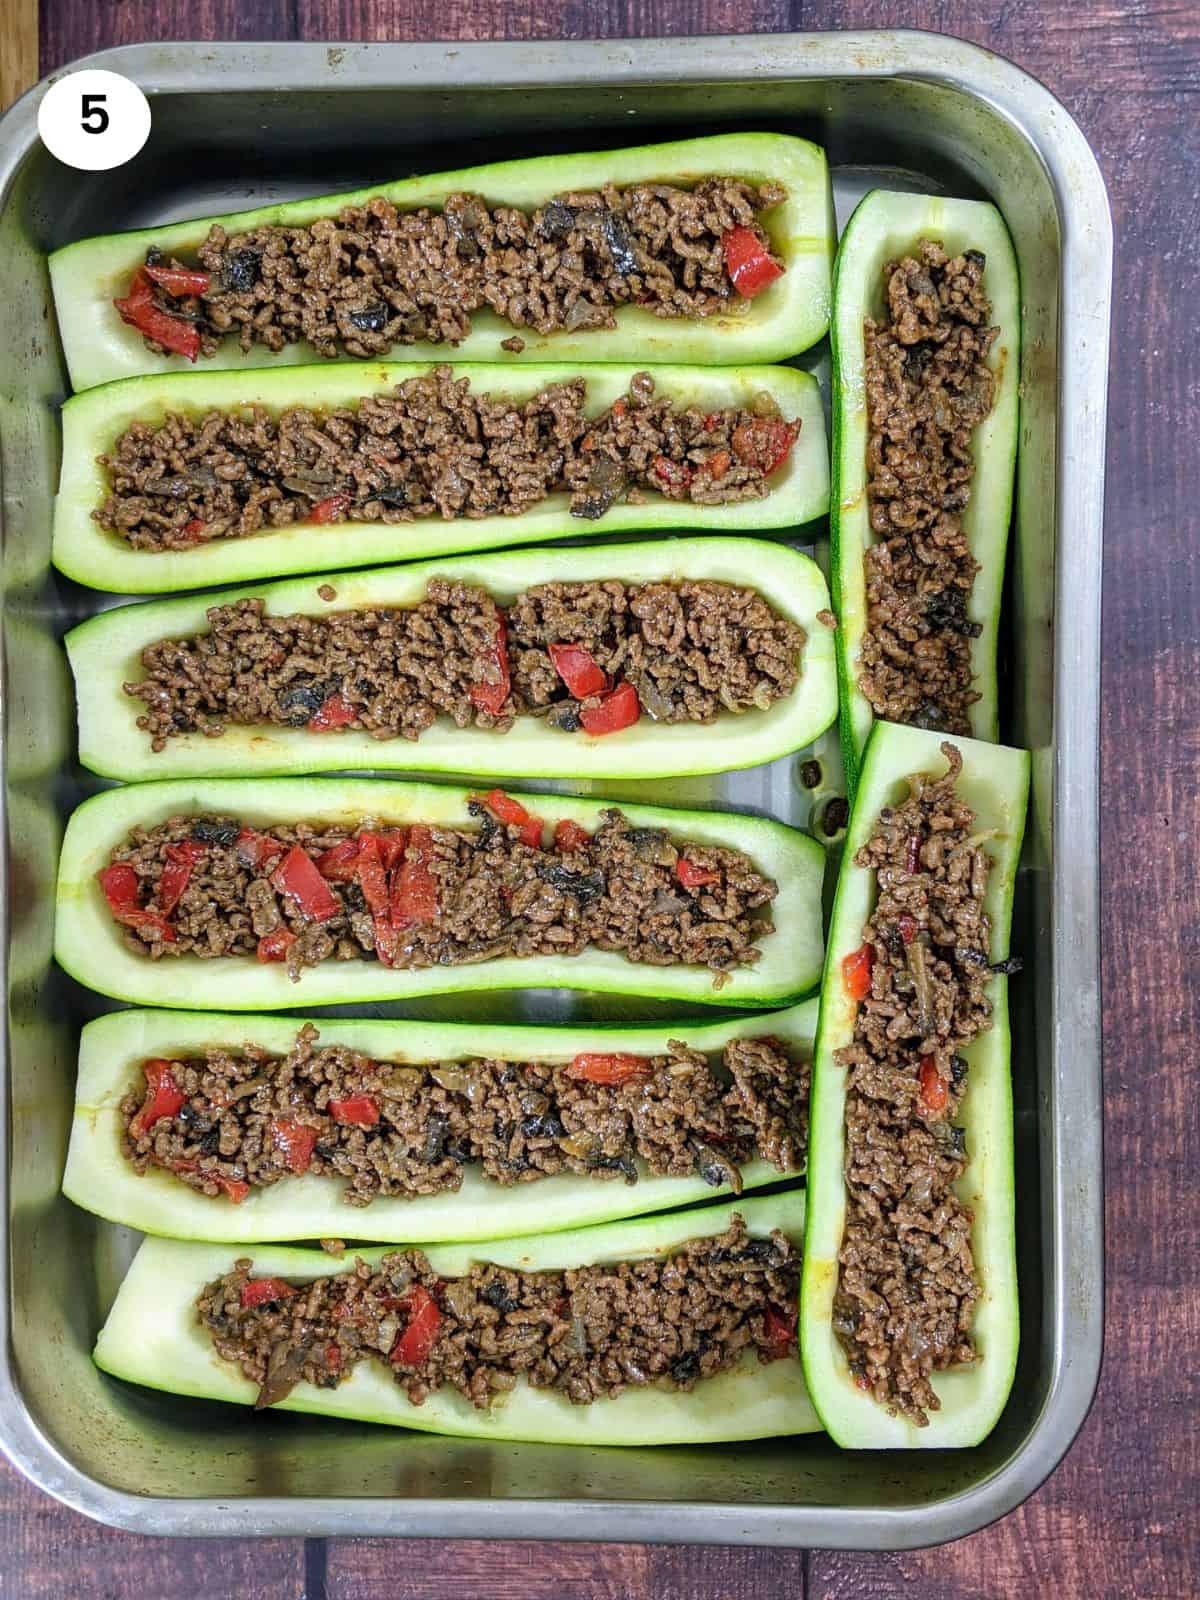 Stuffed zucchini boats with ground beef filling.